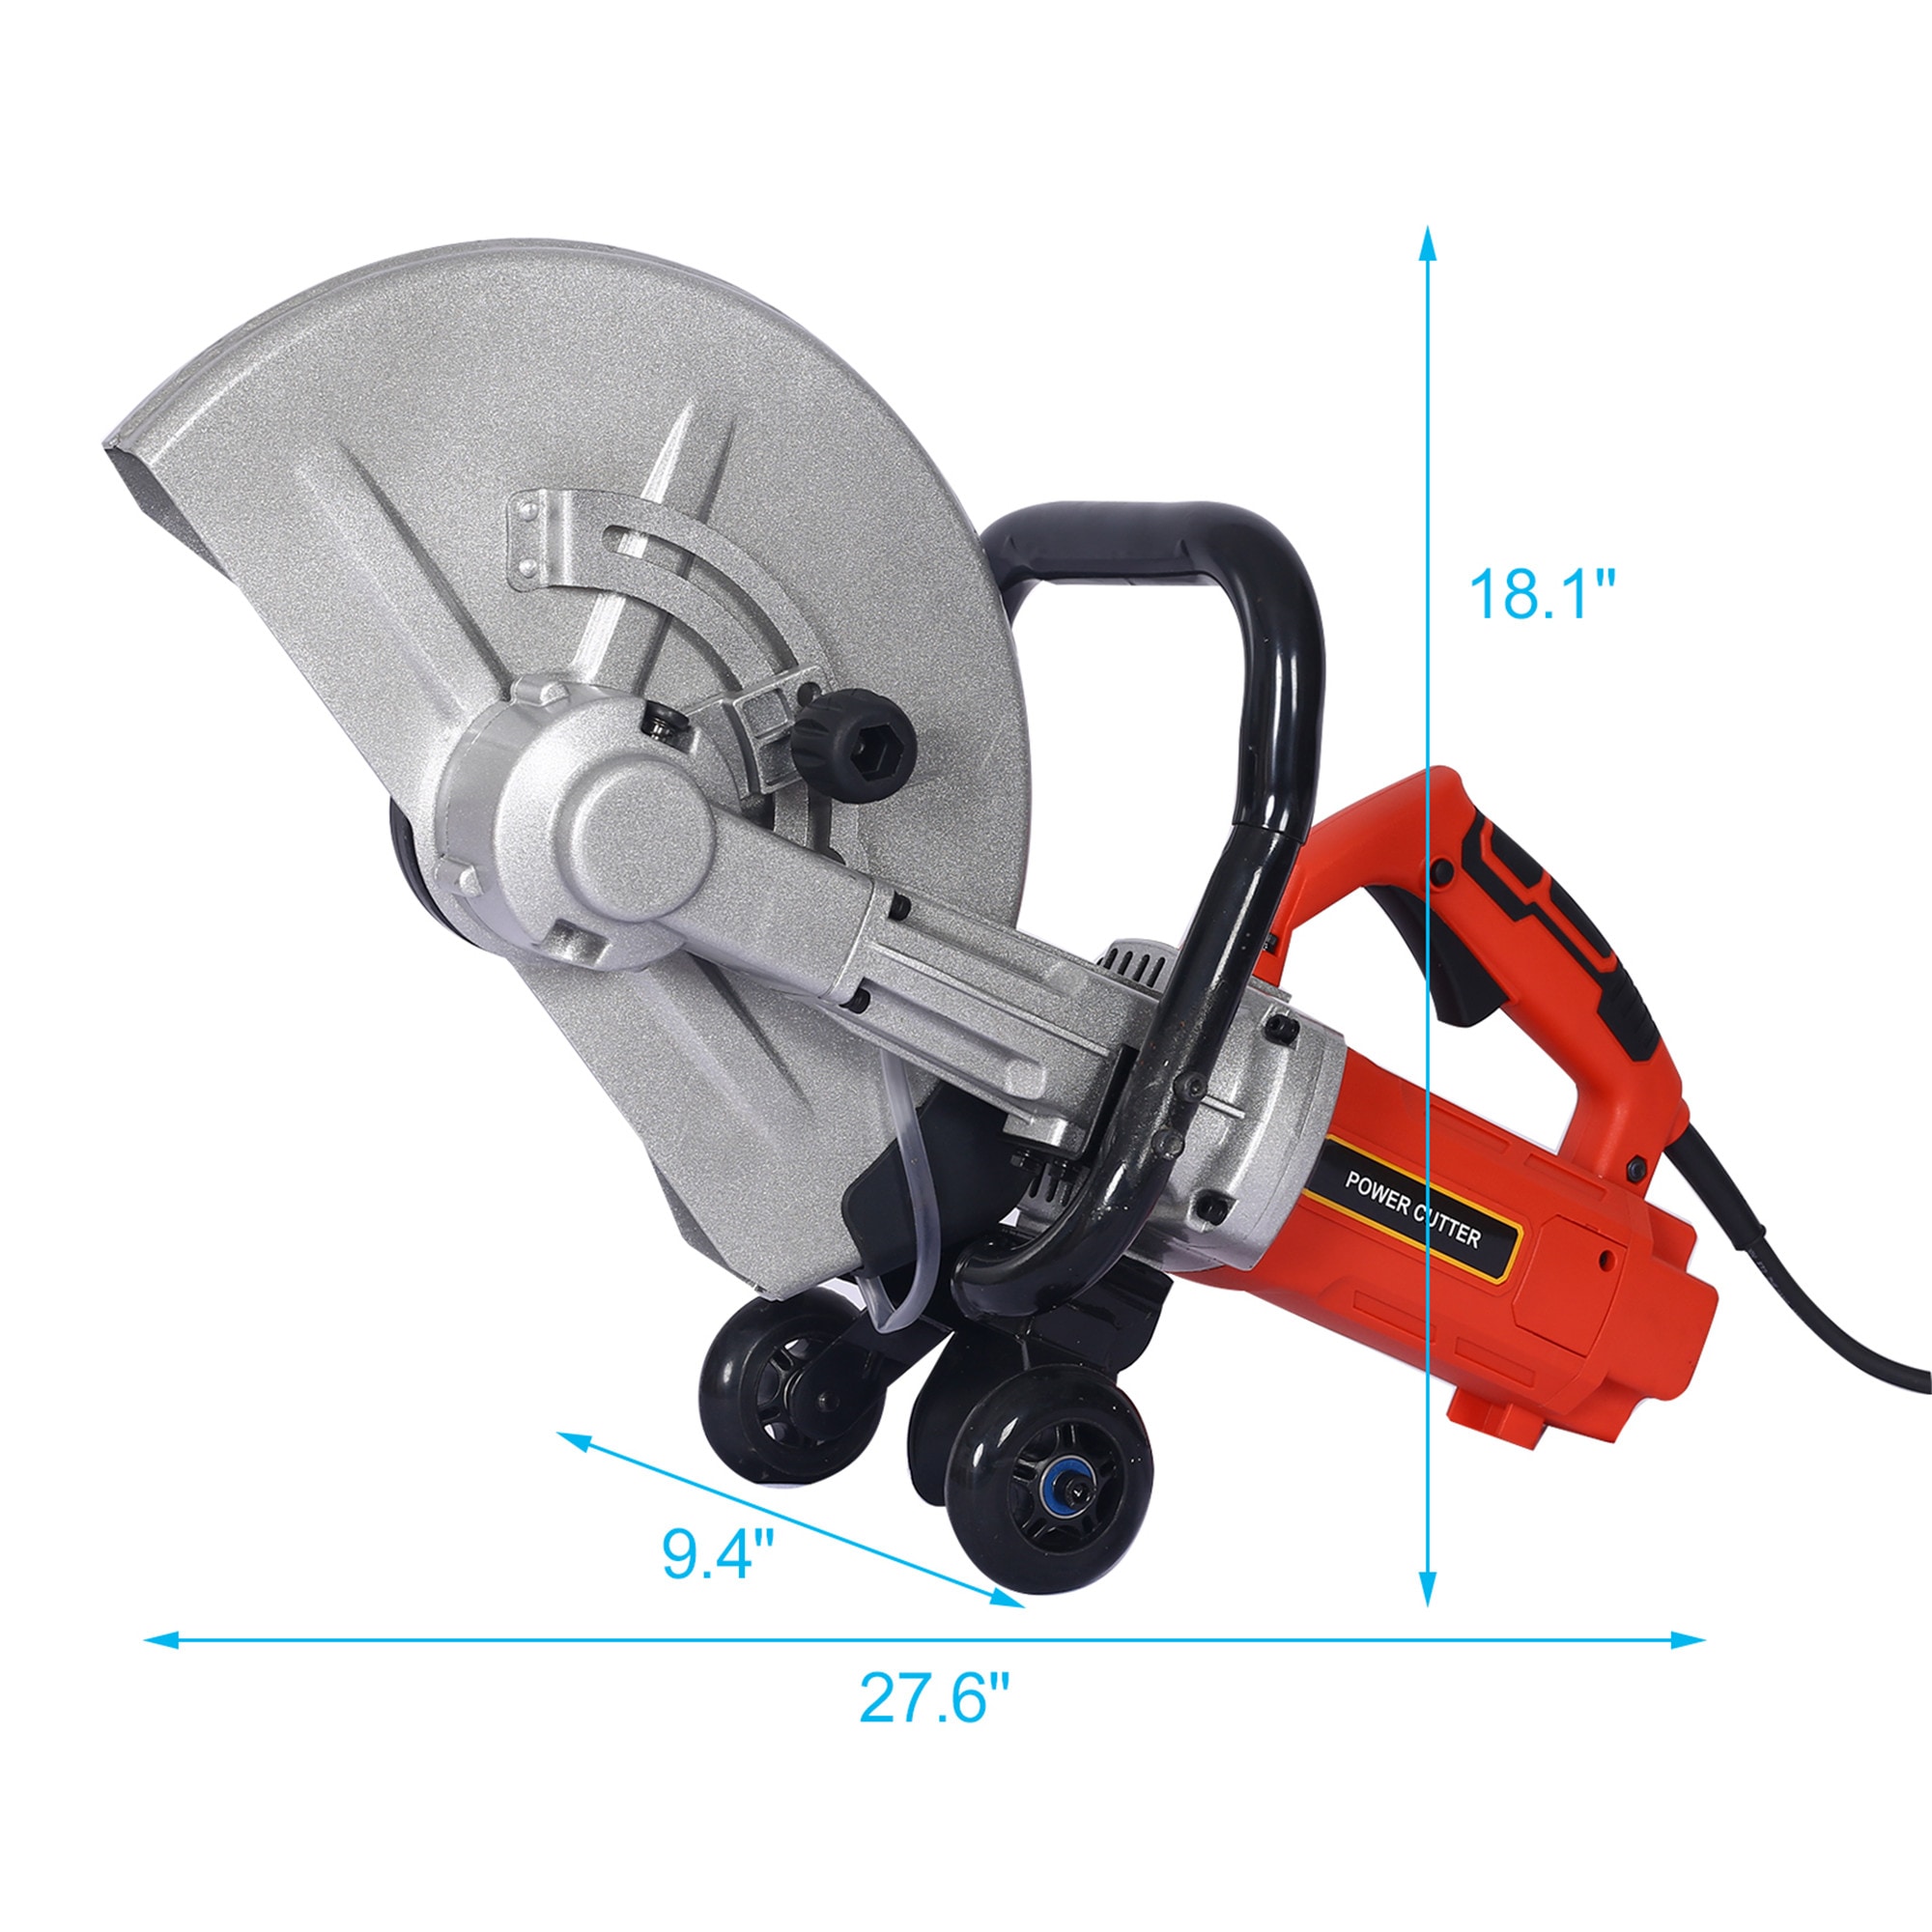 XtremepowerUS 3200W 16 In Electric Cutter Circular Saw Wet/Dry Concrete Saw  Cutter Guide Roller Cut Off Saw, Demo Saw, Disc Cutter, Power Cutter 